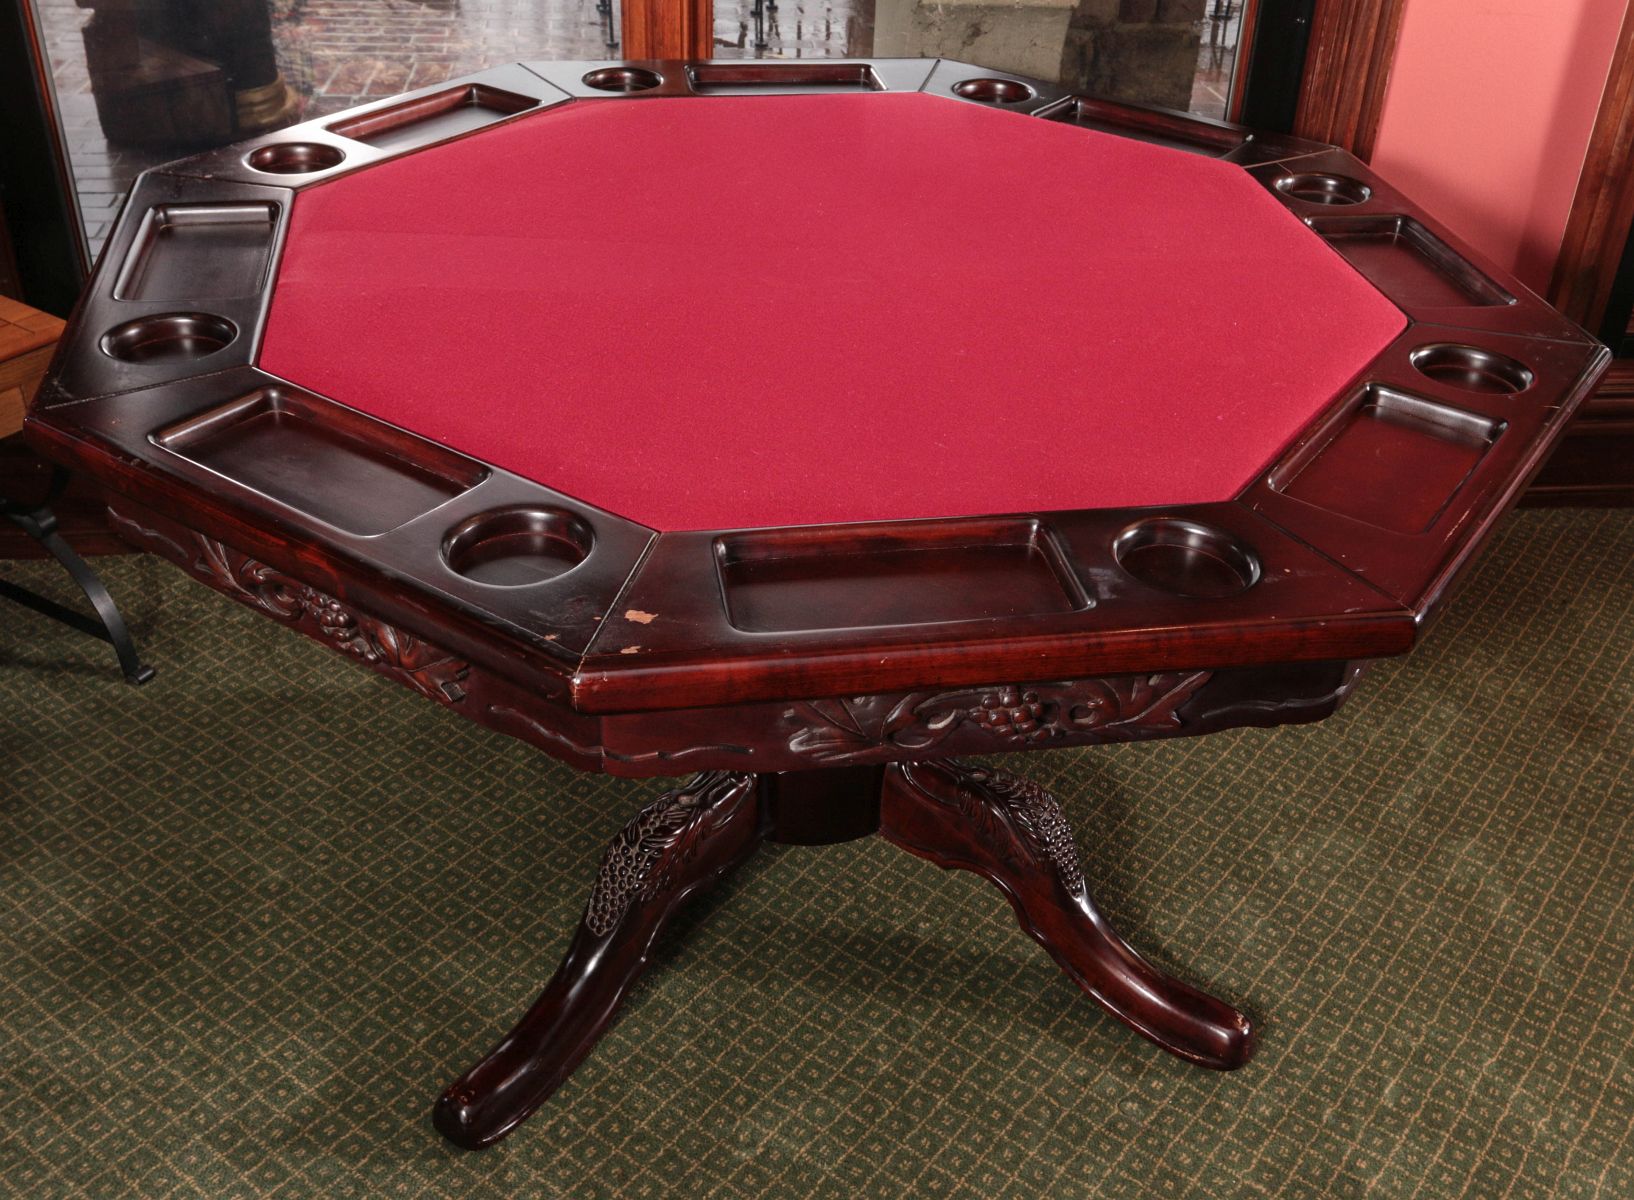 A LATE 20TH CENTURY MAHOGANY POKER TABLE & CHAIRS